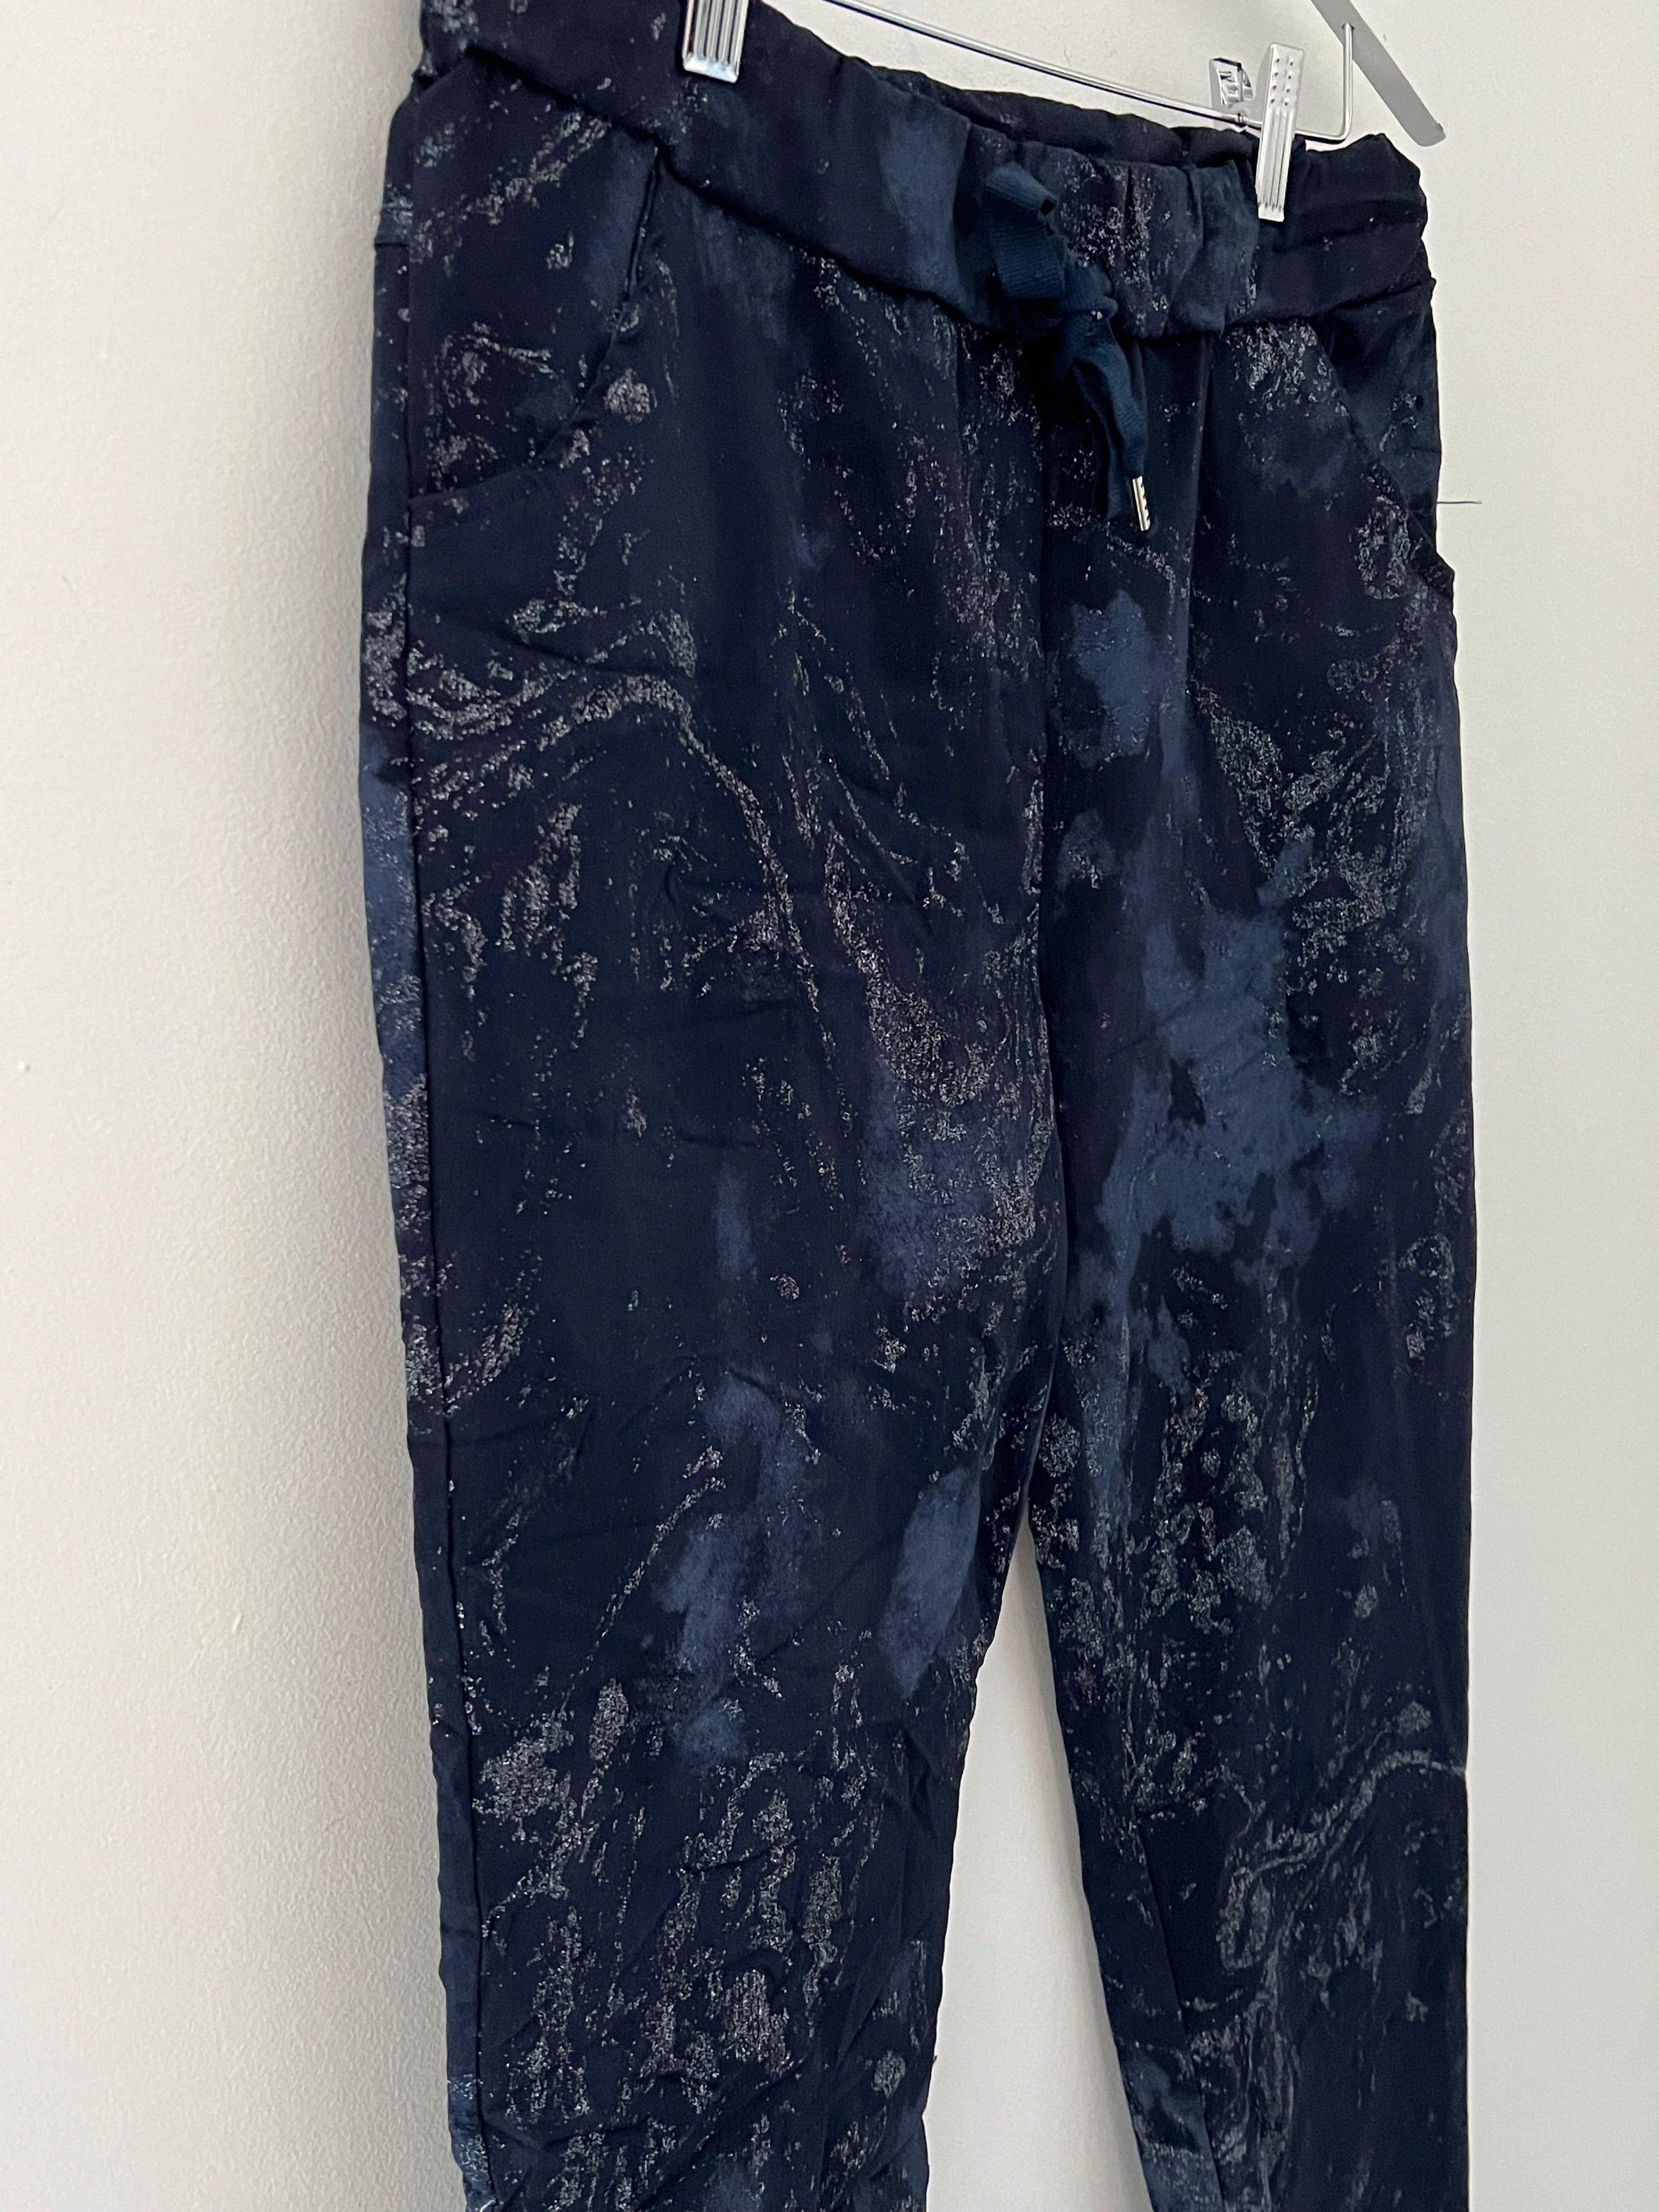 Slimfit Sparkle Water Print Joggers in Ink